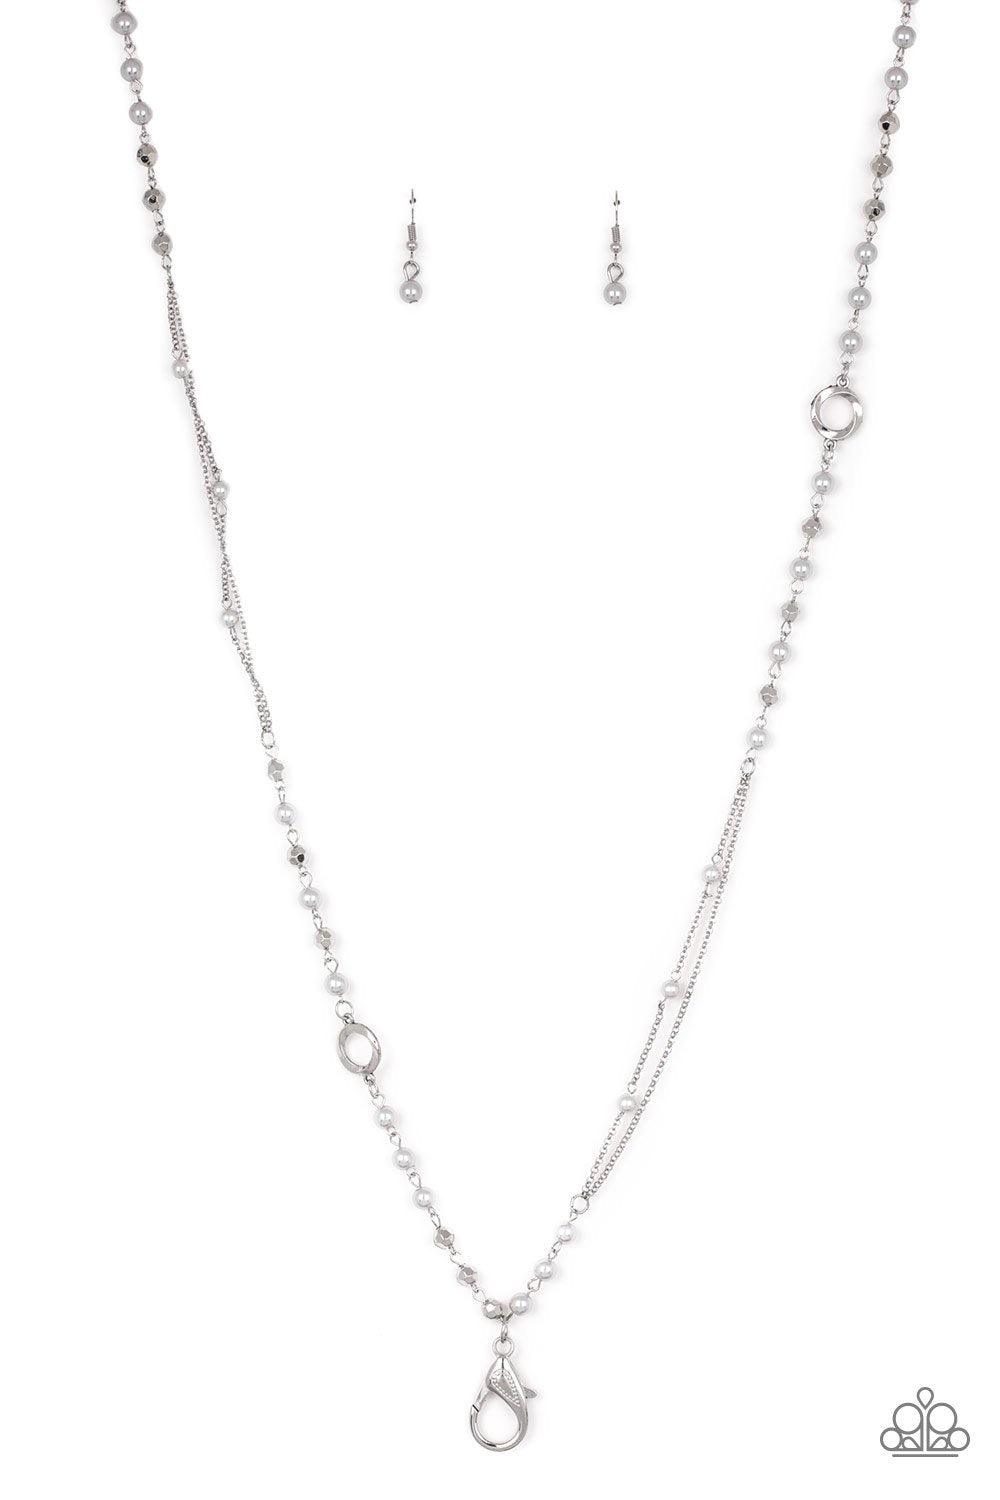 Paparazzi Accessories Really Refined - Silver *Lanyard A collection of pearly silver, twisting silver hoops, and faceted silver beads trickle along an asymmetrical silver chain for a refined look. A lobster clasp hangs from the bottom of the design to all